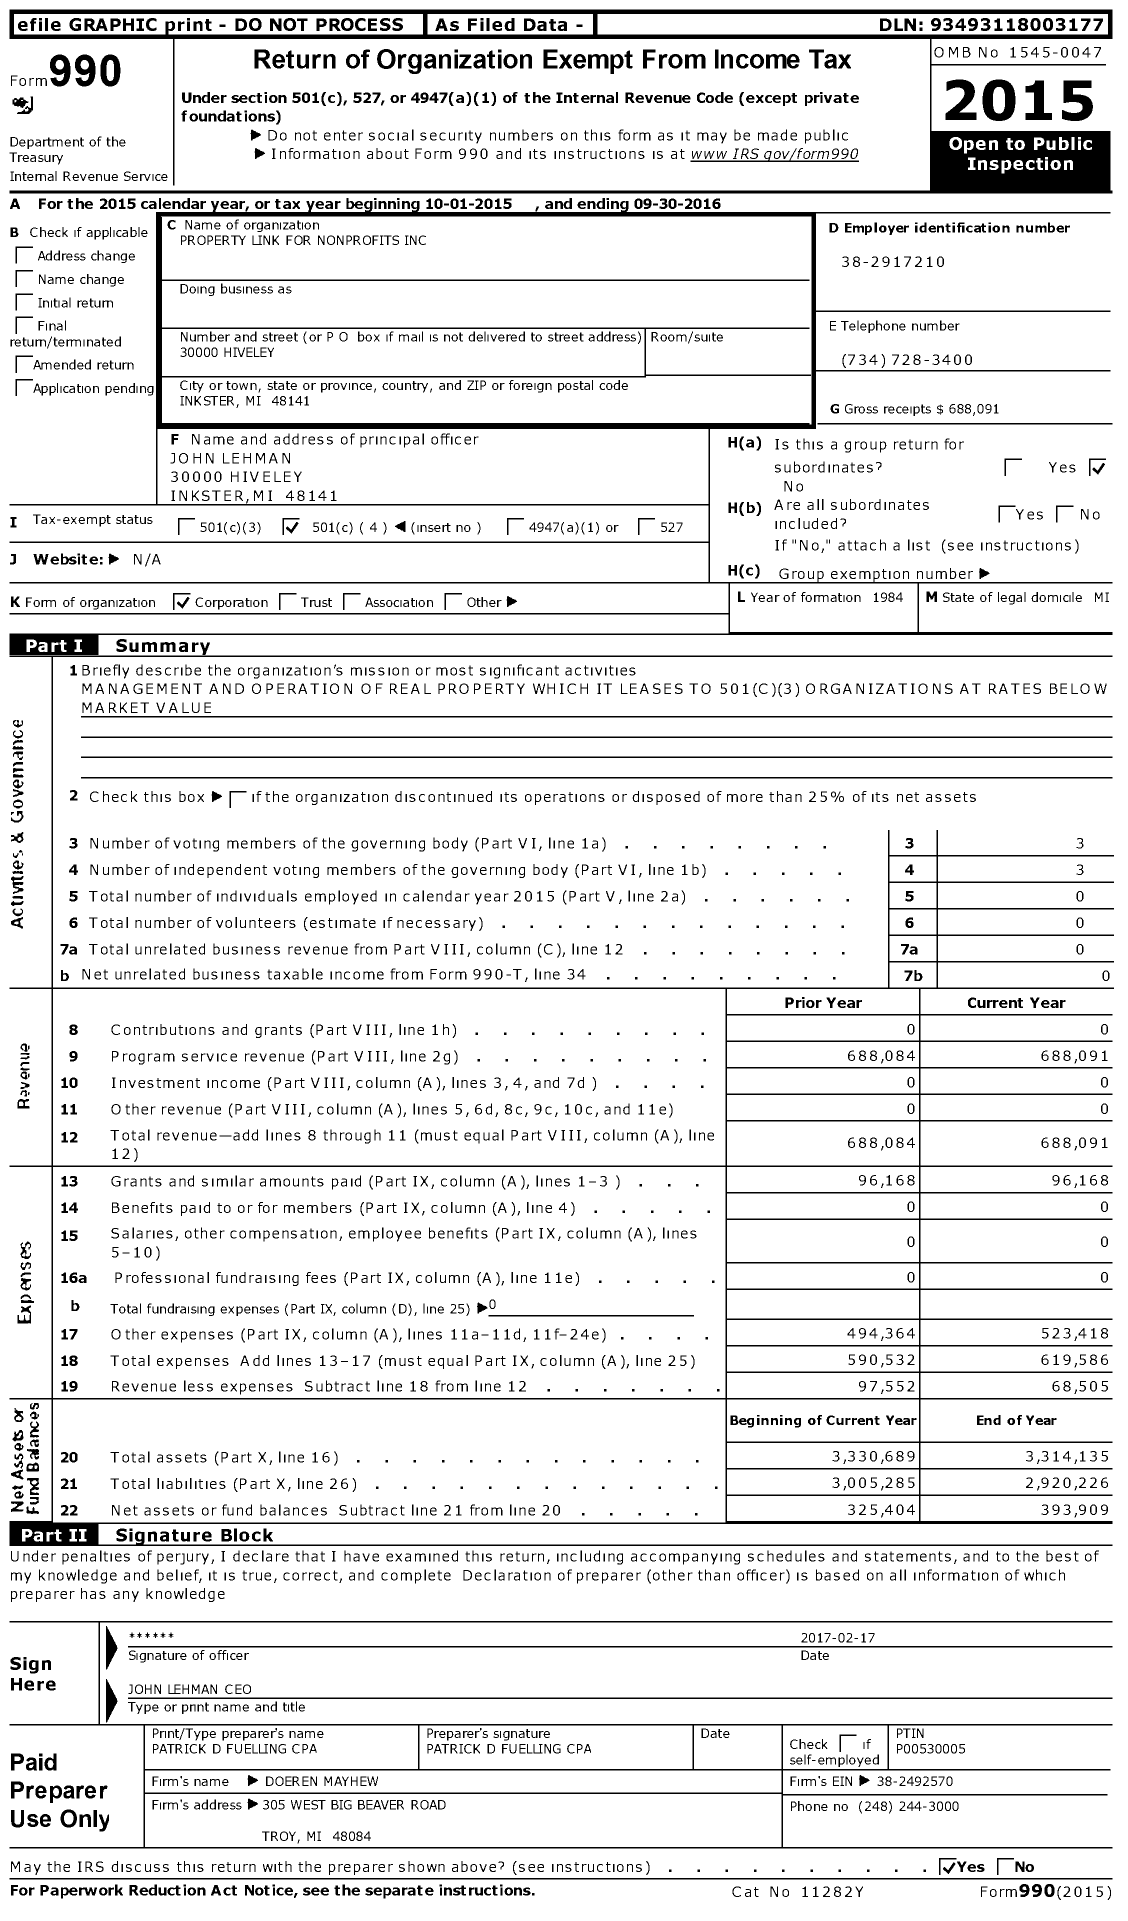 Image of first page of 2015 Form 990O for Property Link for Nonprofits